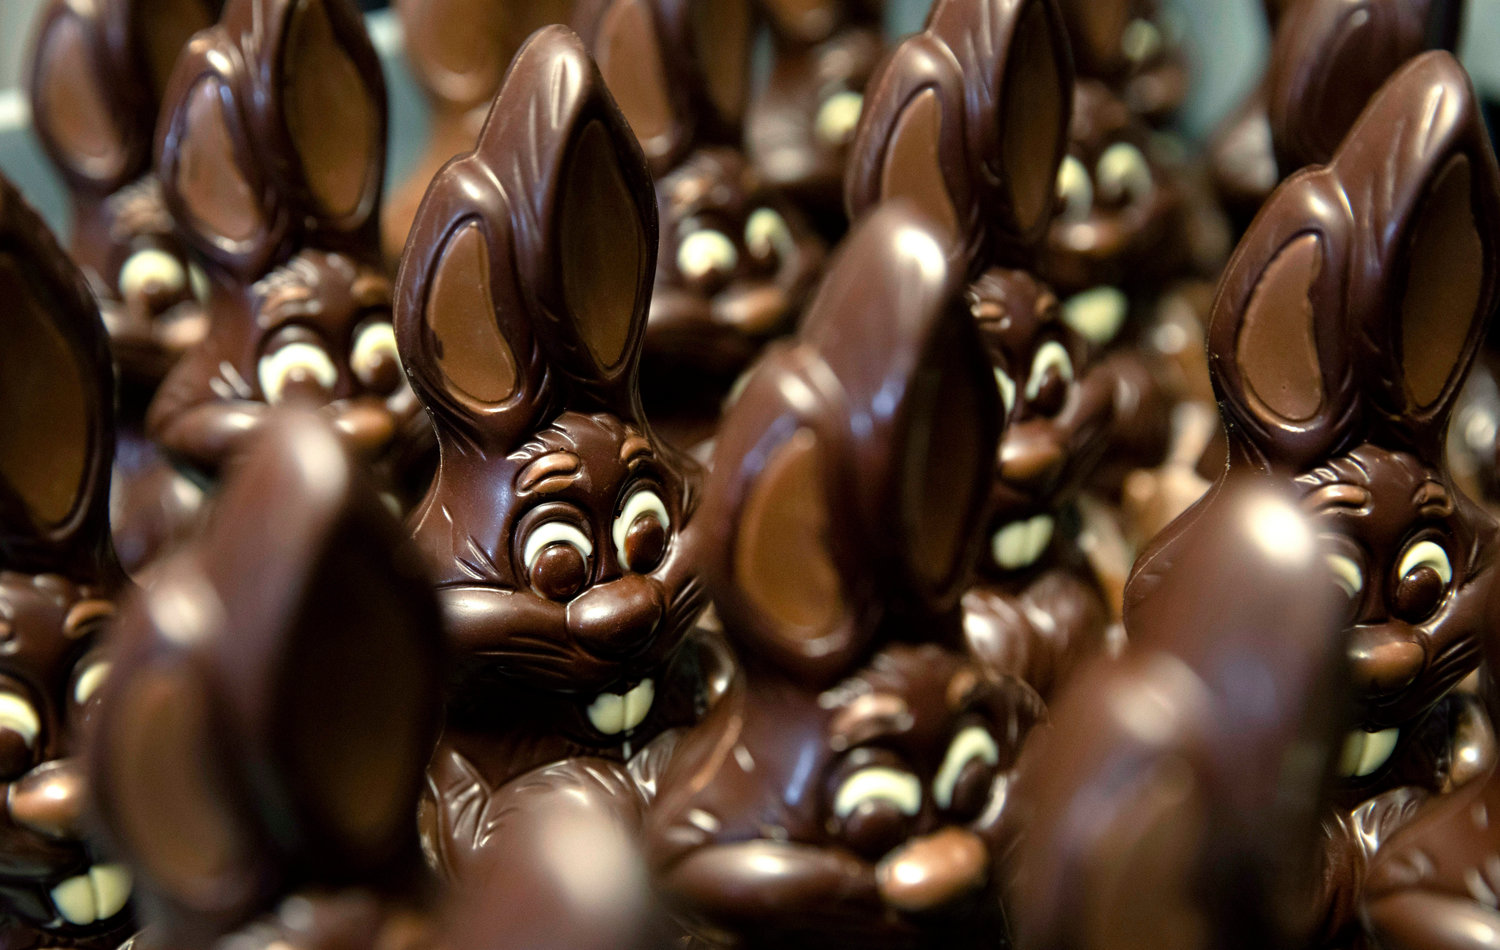 HOLIDAY TREAT —Chocolate rabbits wait to be decorated at the Cocoatree chocolate shop in Lonzee, Belgium. As all non-essential shops in Belgium have been closed due to the outbreak of COVID-19, many chocolatiers have had to resort to online sales, home delivery or pickup on site.